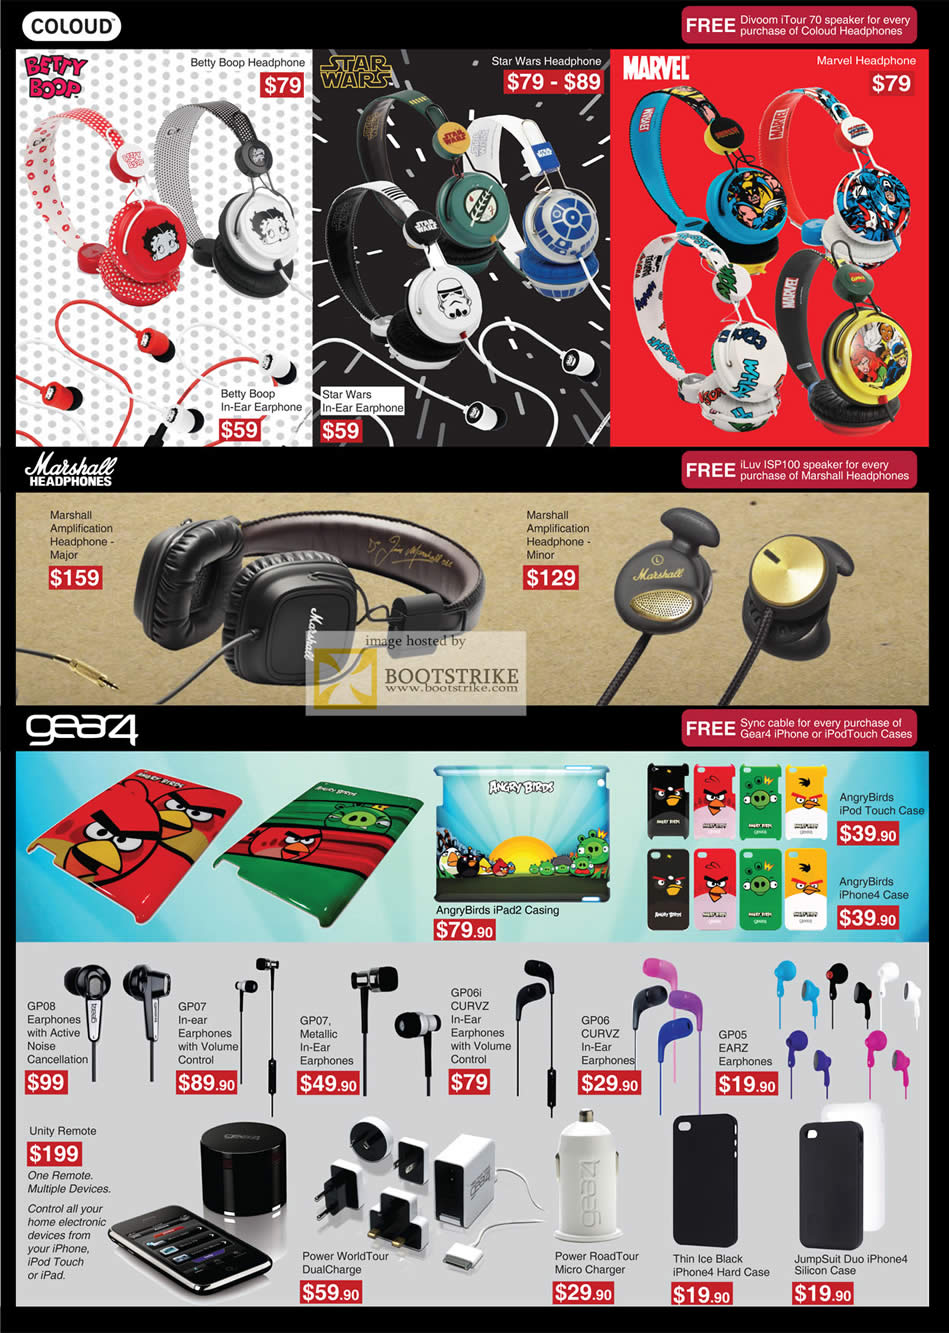 COMEX 2011 price list image brochure of Mccoy Headset Headphone Coloud Betty Boop Star Wars Marvel Marshall Gear4 Earphones Curvz Angry Birds IPad2 Case IPhone4 Charger Power RoadTour Remote JumpSuit Thin Ice